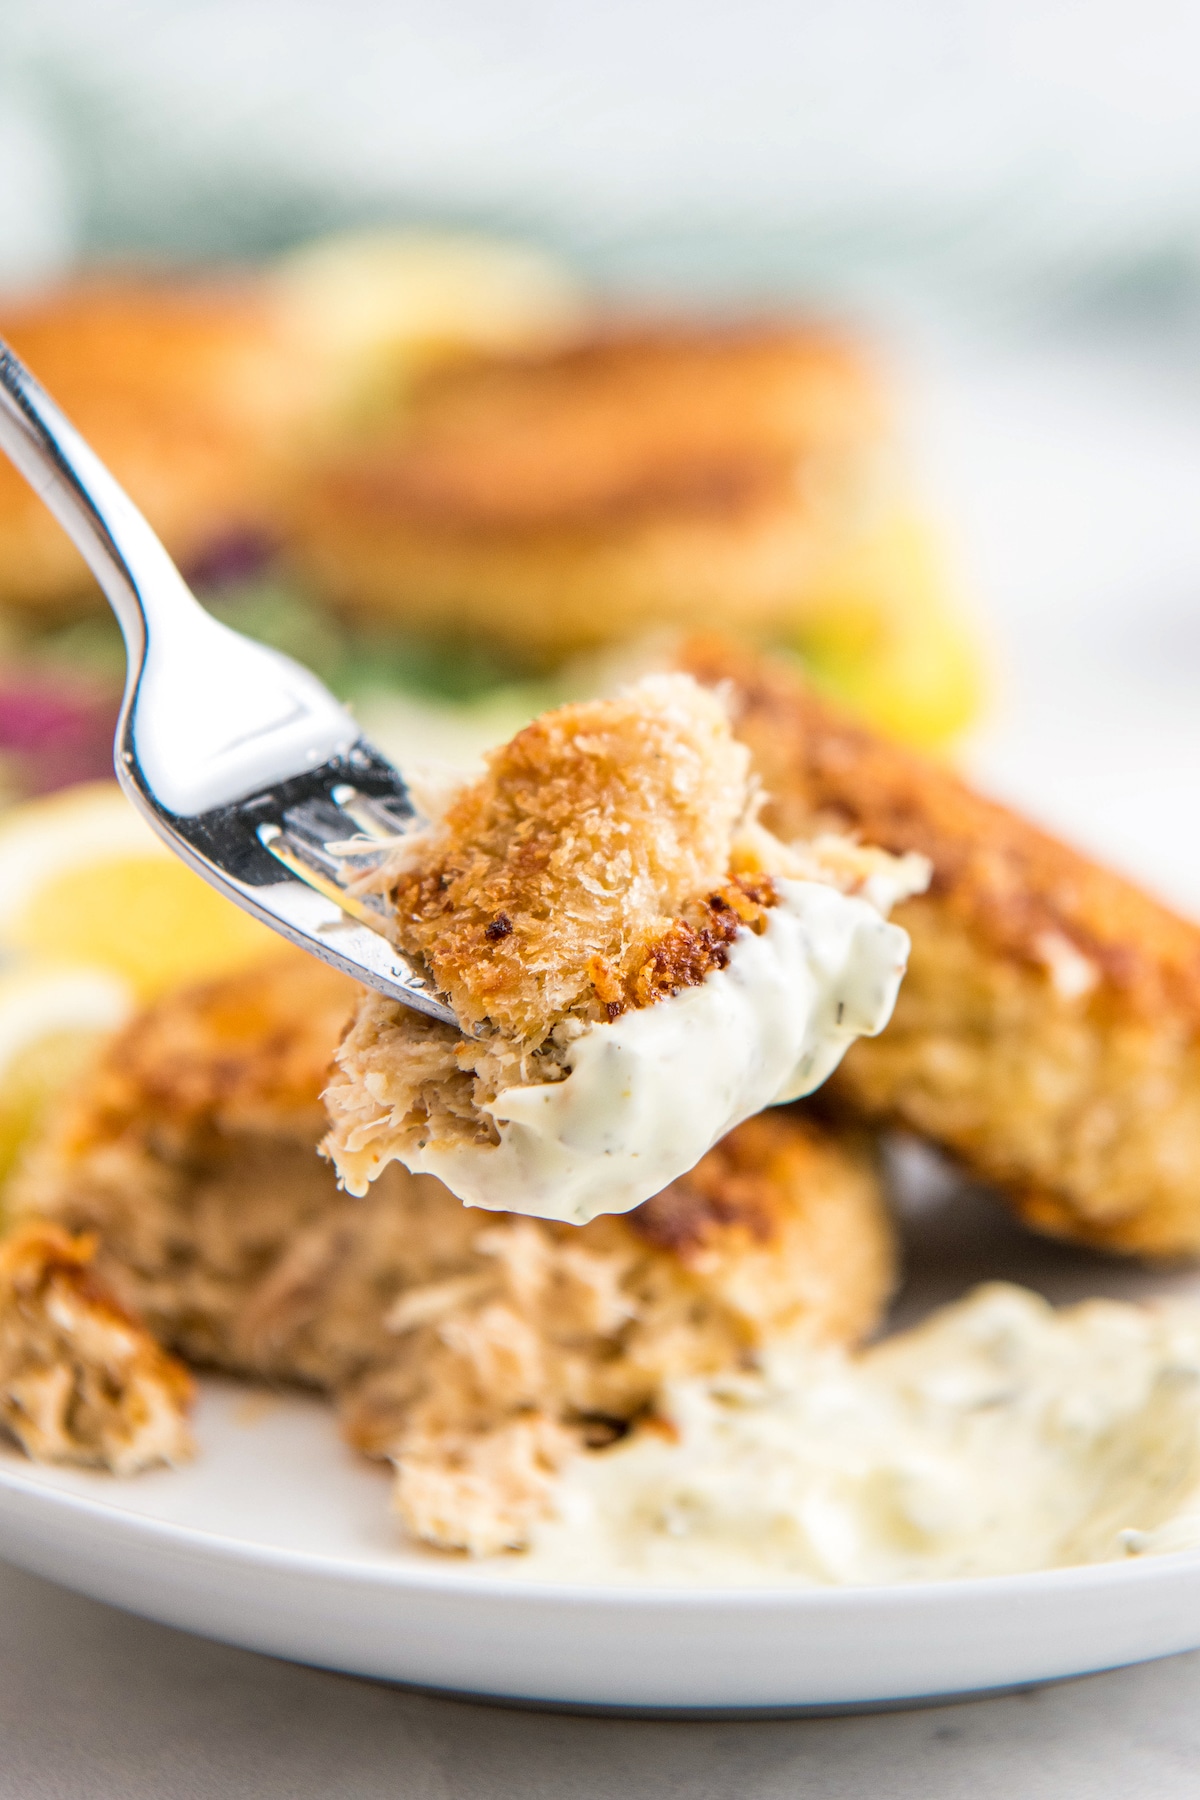 A bite of tuna cake on a fork with tartar sauce on it.